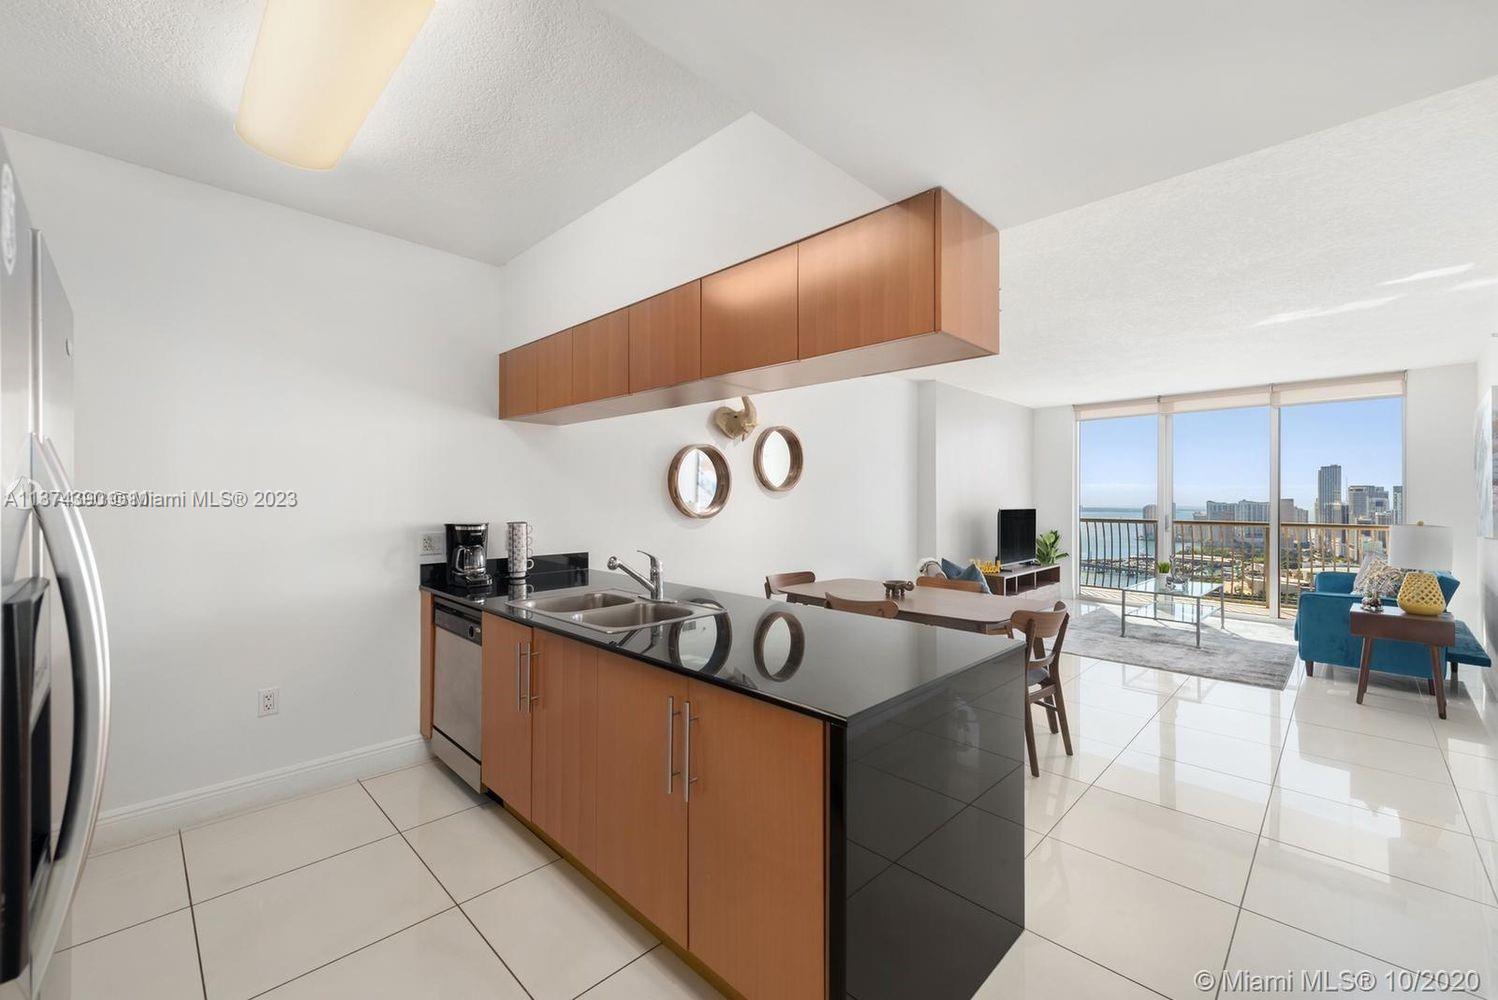 Photo 2 of Opera Tower Apt 5010 in Miami - MLS A11374390